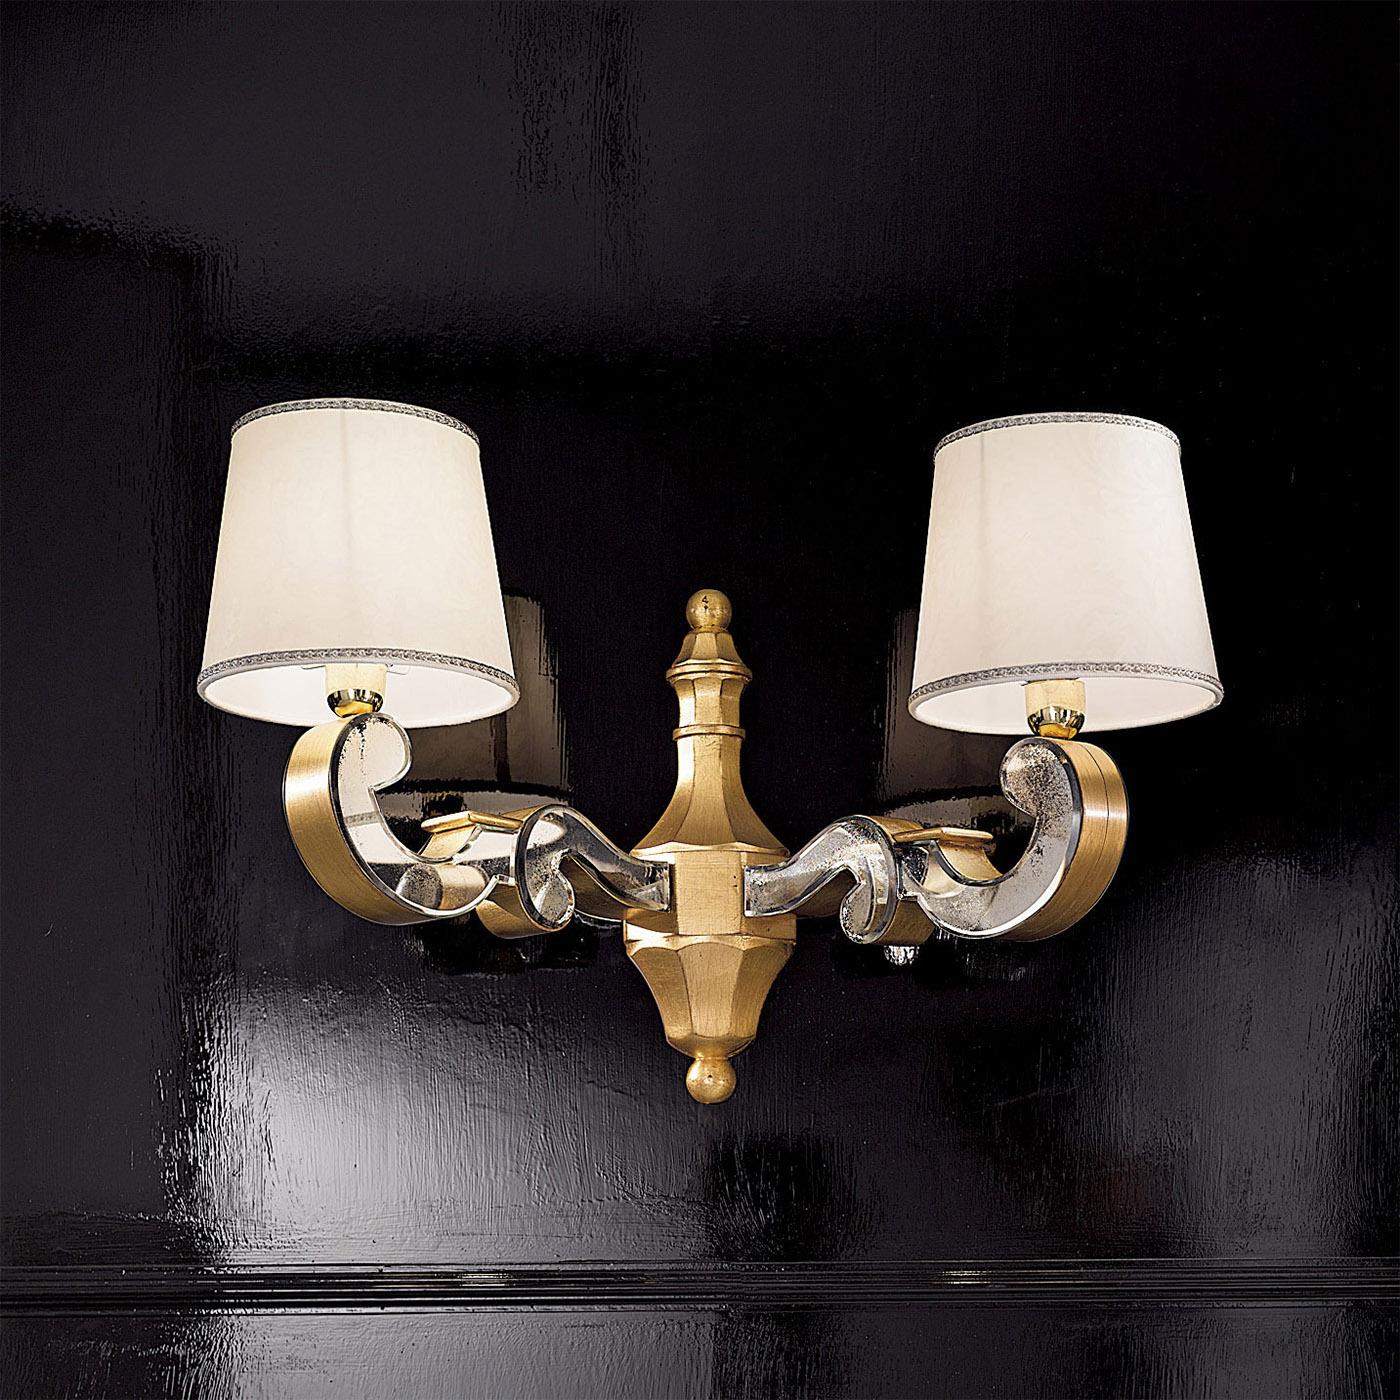 Part of the Notre Dame collection, the Charlotte sconce is inspired by the Art Deco period. This wall lamp features two lights and a wooden structure finished in golden leaf and hand-beveled antiqued mirror.